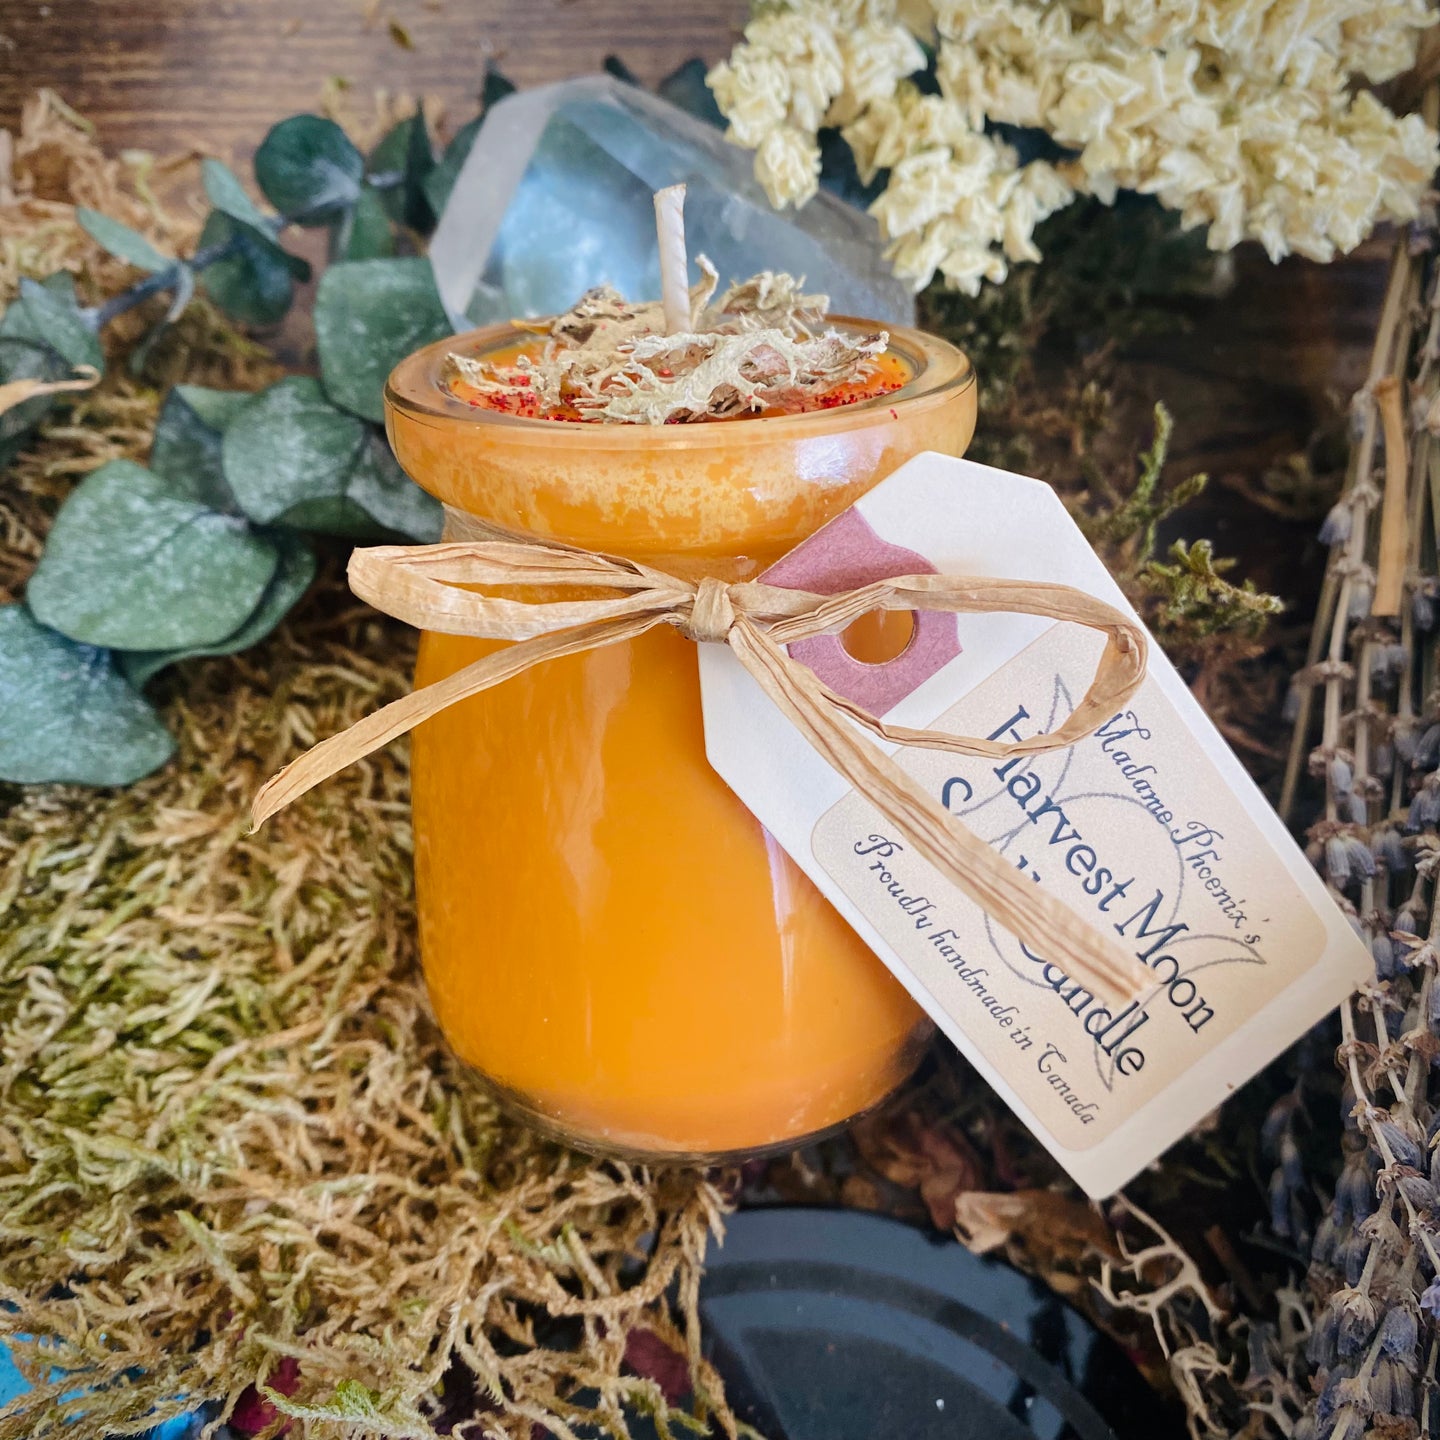 Harvest Moon Blessing Mini Spell Candles with Essential Oil Magical Blend